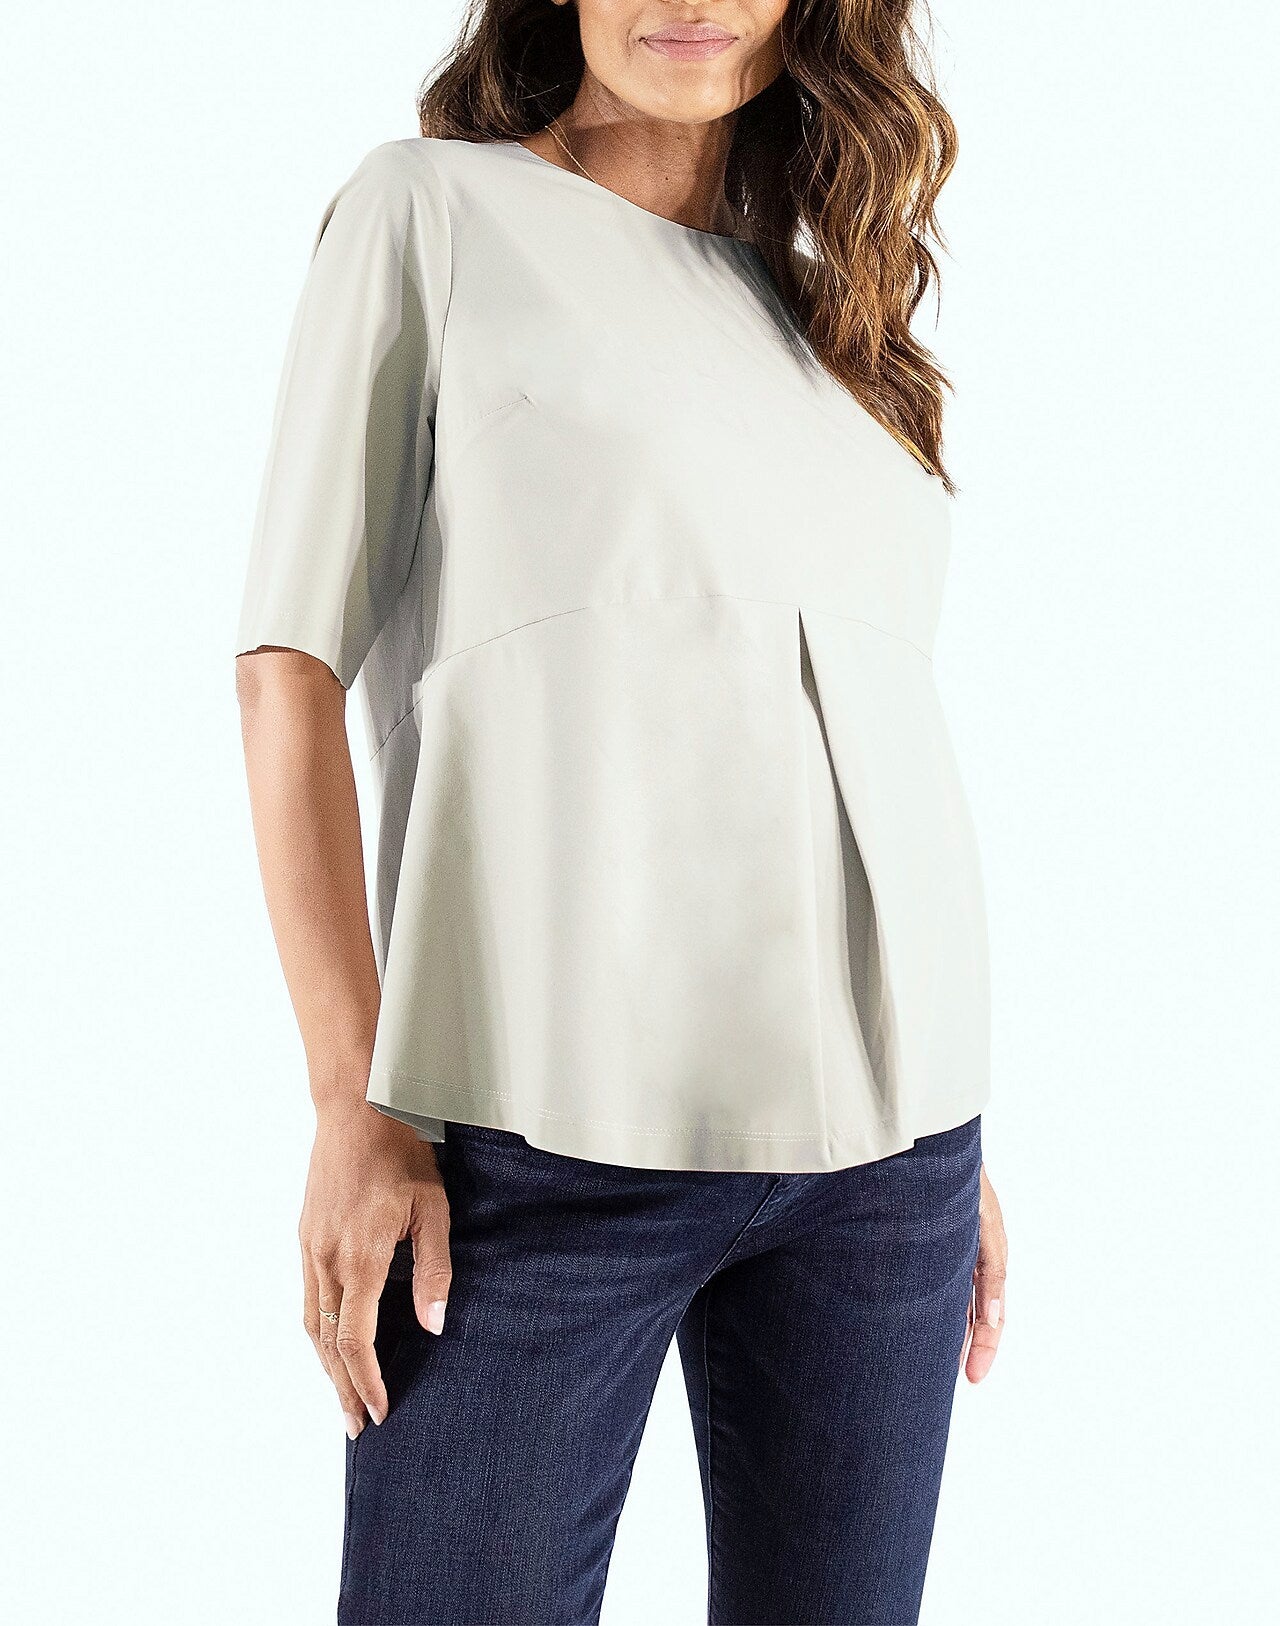 Woven Zip Back Maternity Top by Ingrid & Isabel